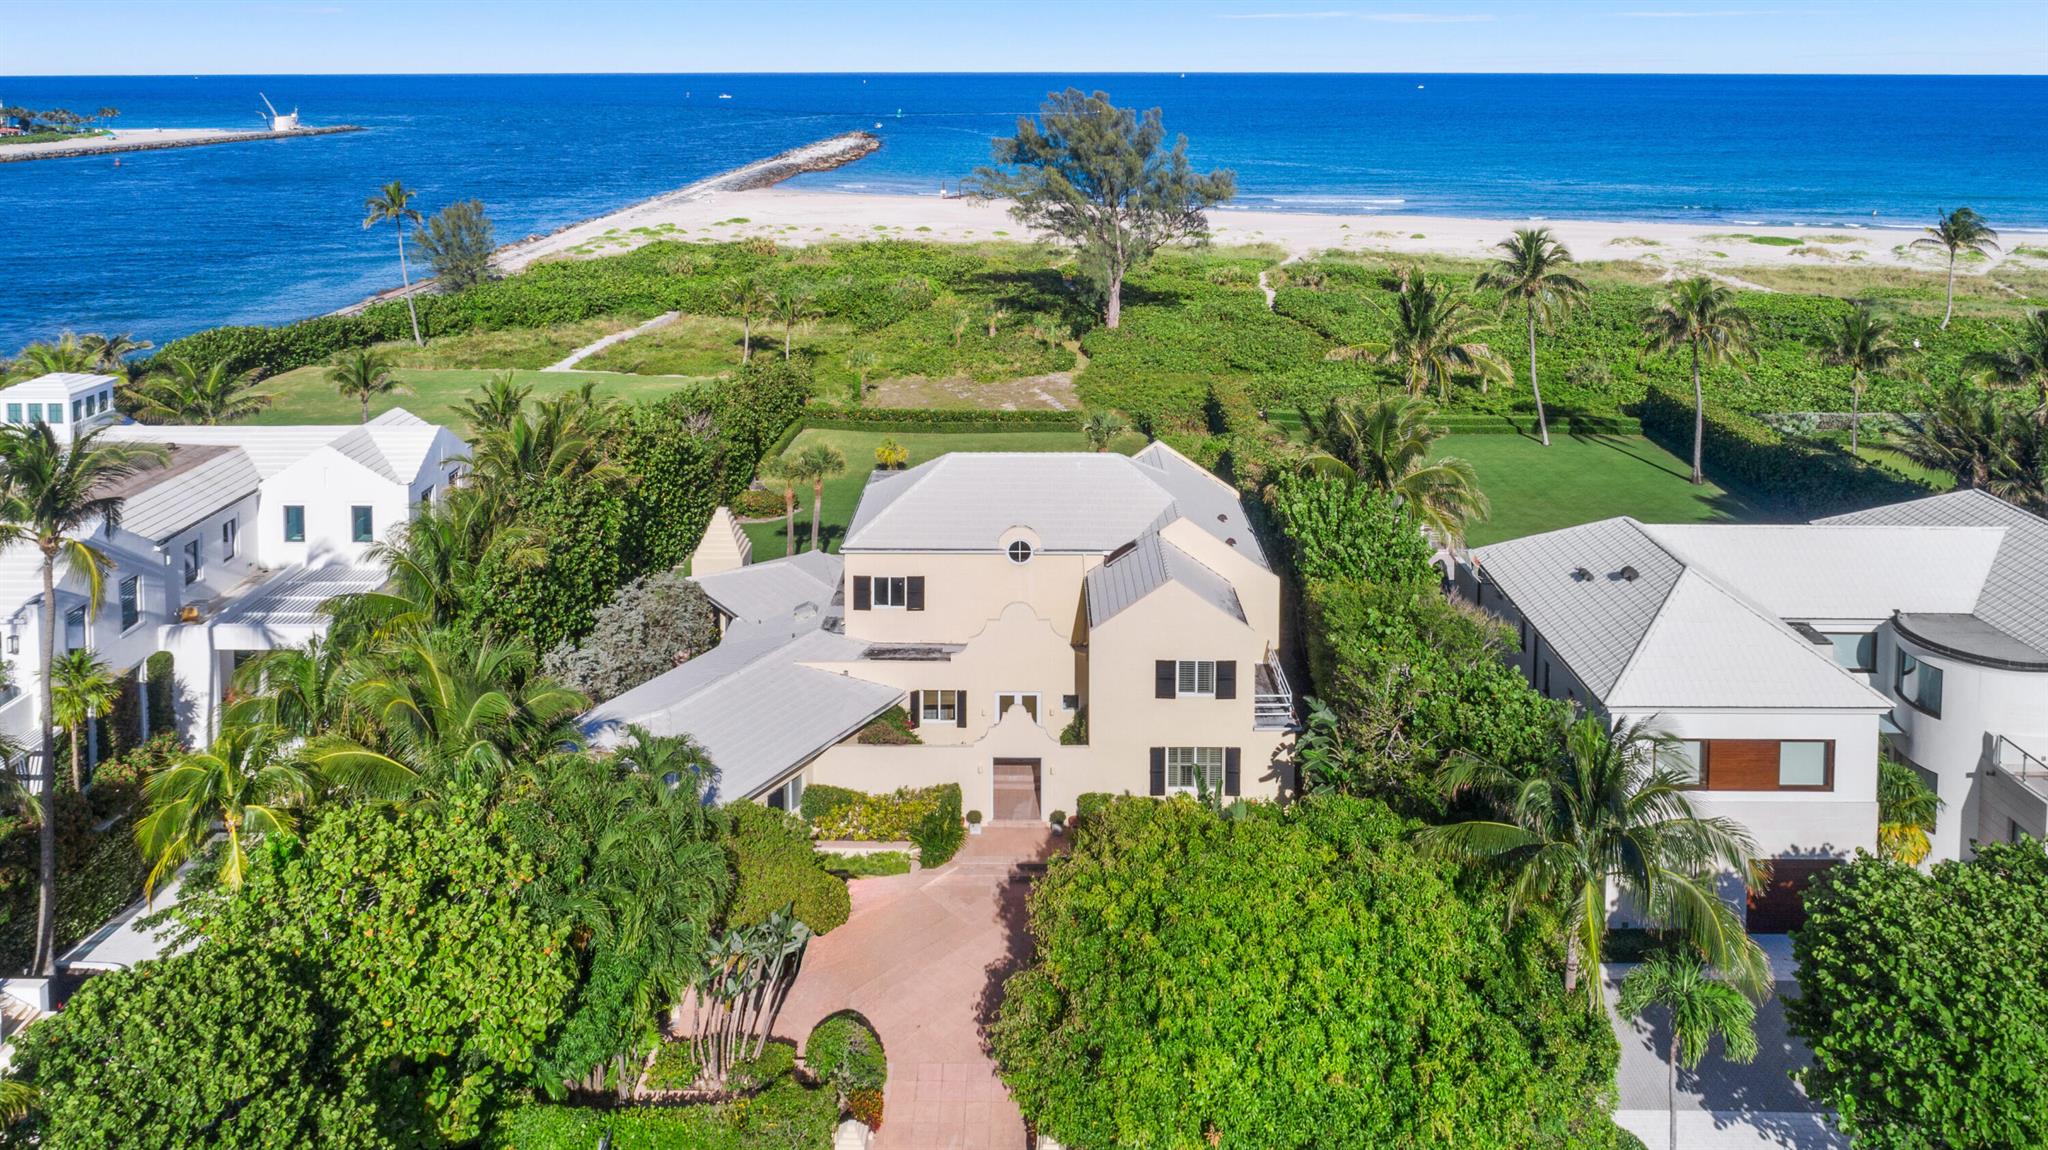 Direct Oceanfront home with private beach and sweeping ocean views from the main primary rooms. A rare opportunity to enjoy a tranquil setting. The house has 6 bedrooms, 7 baths and 1 half bath.